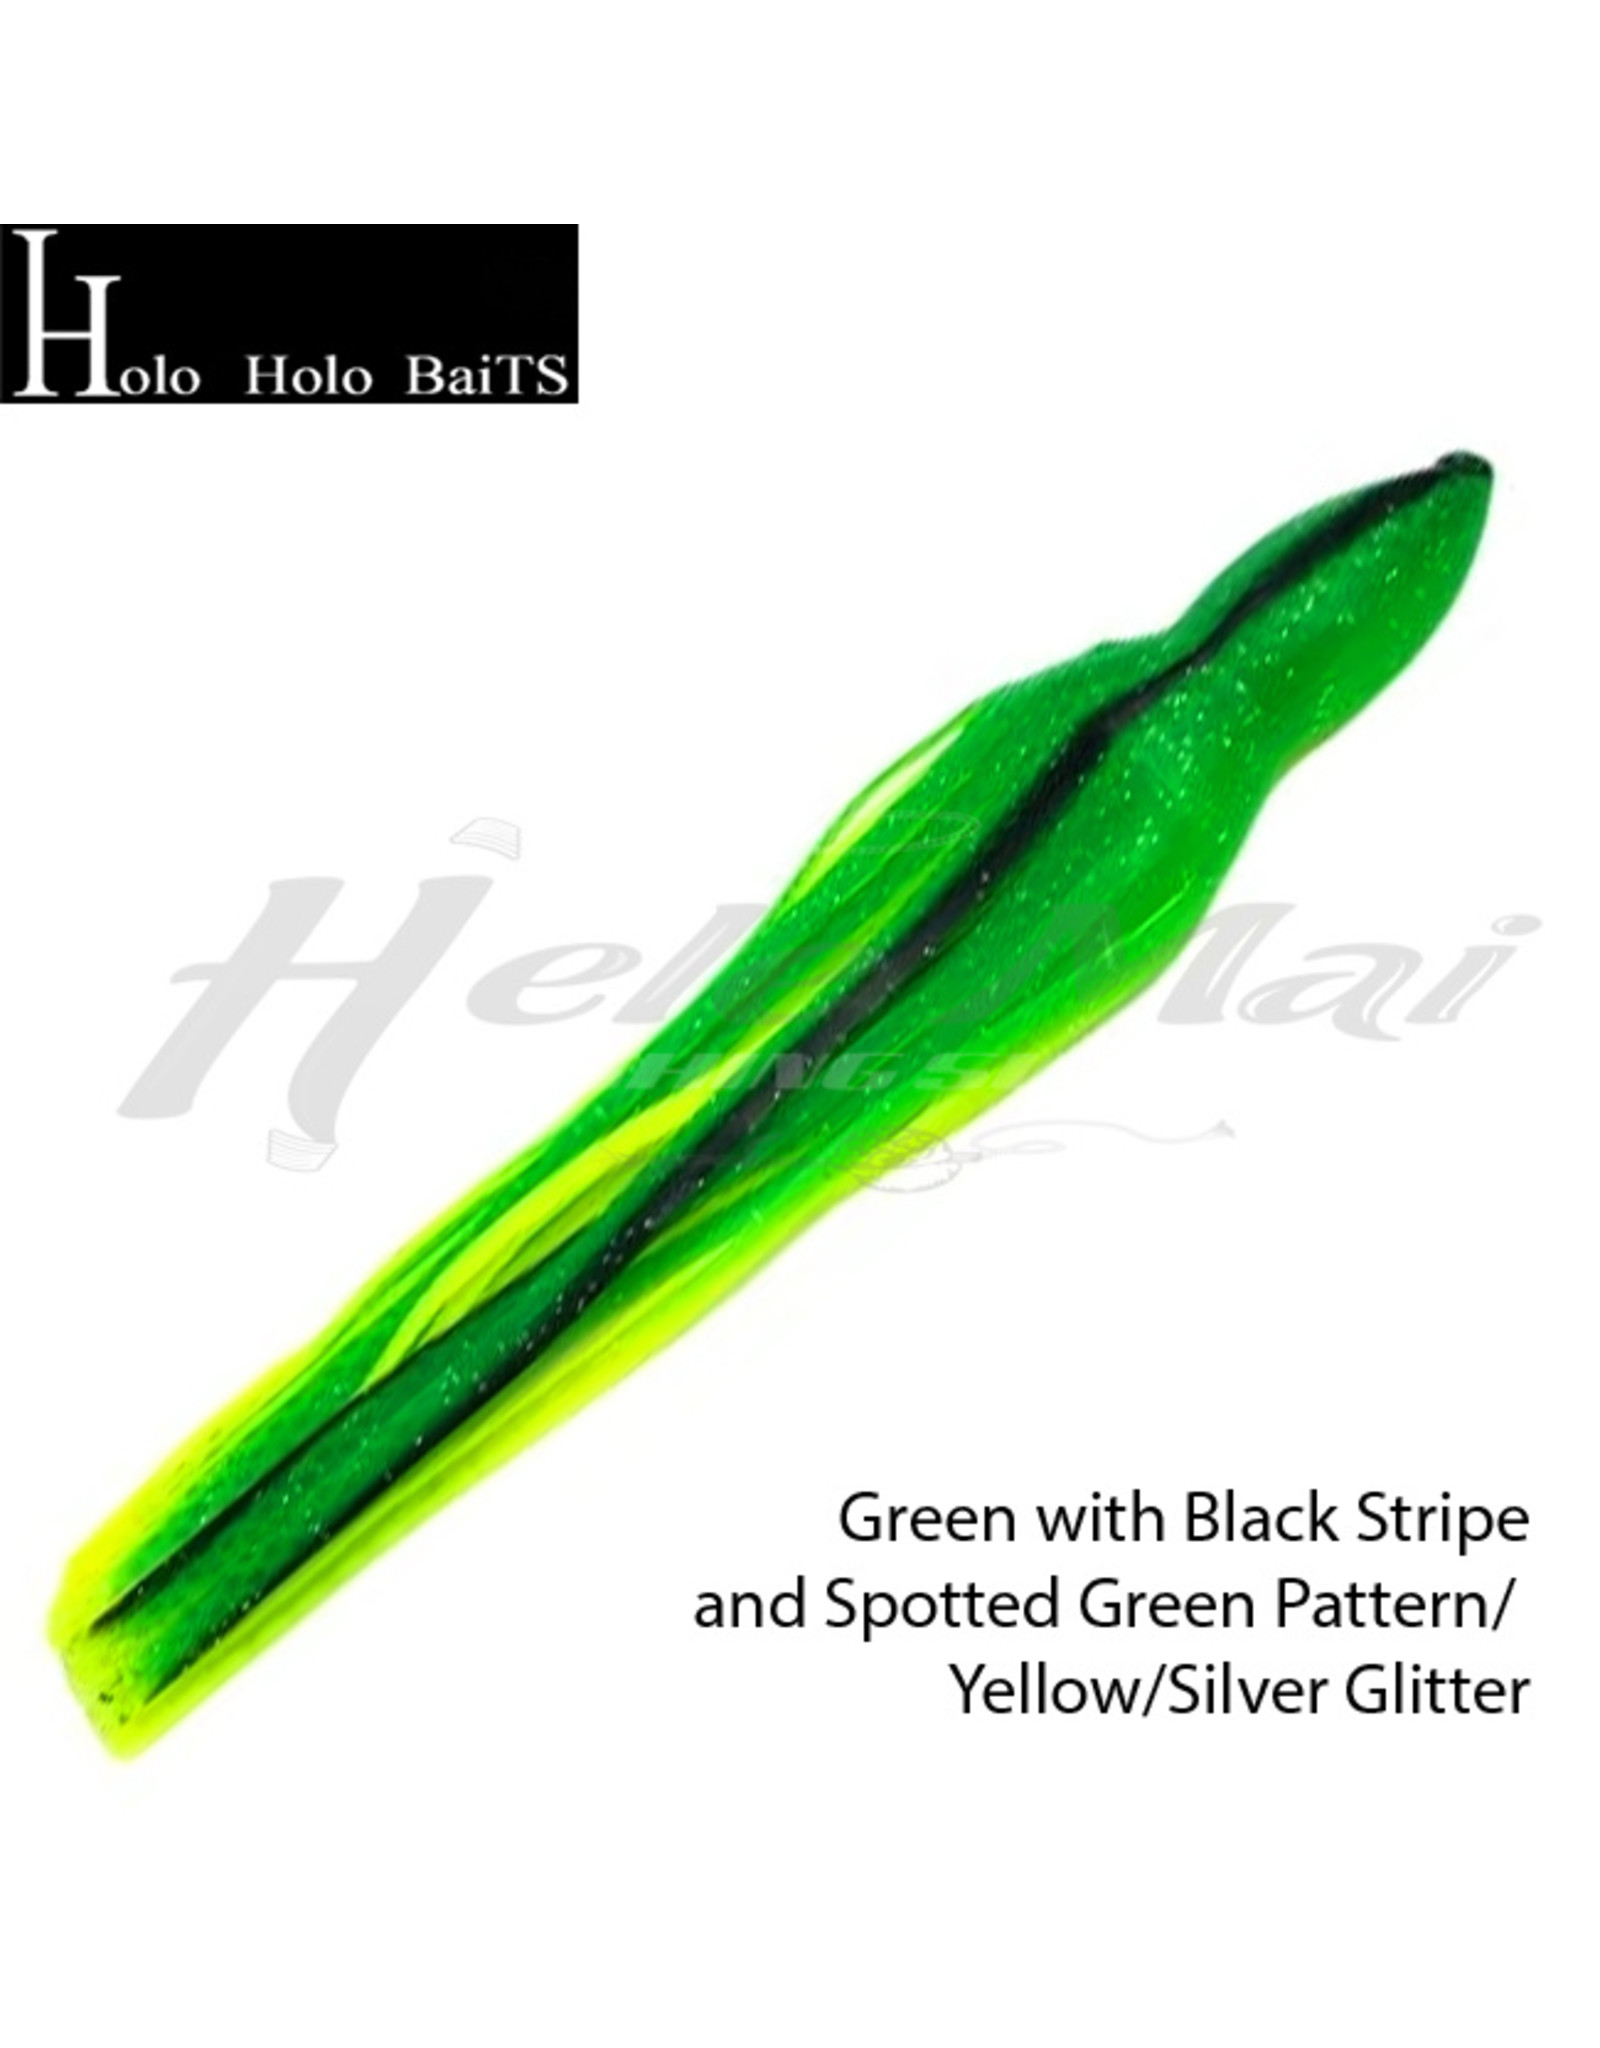 HOLO HOLO HAWAII (HHH) HH, 7" SQUID SKIRT FROG GREEN YELLOW 0099